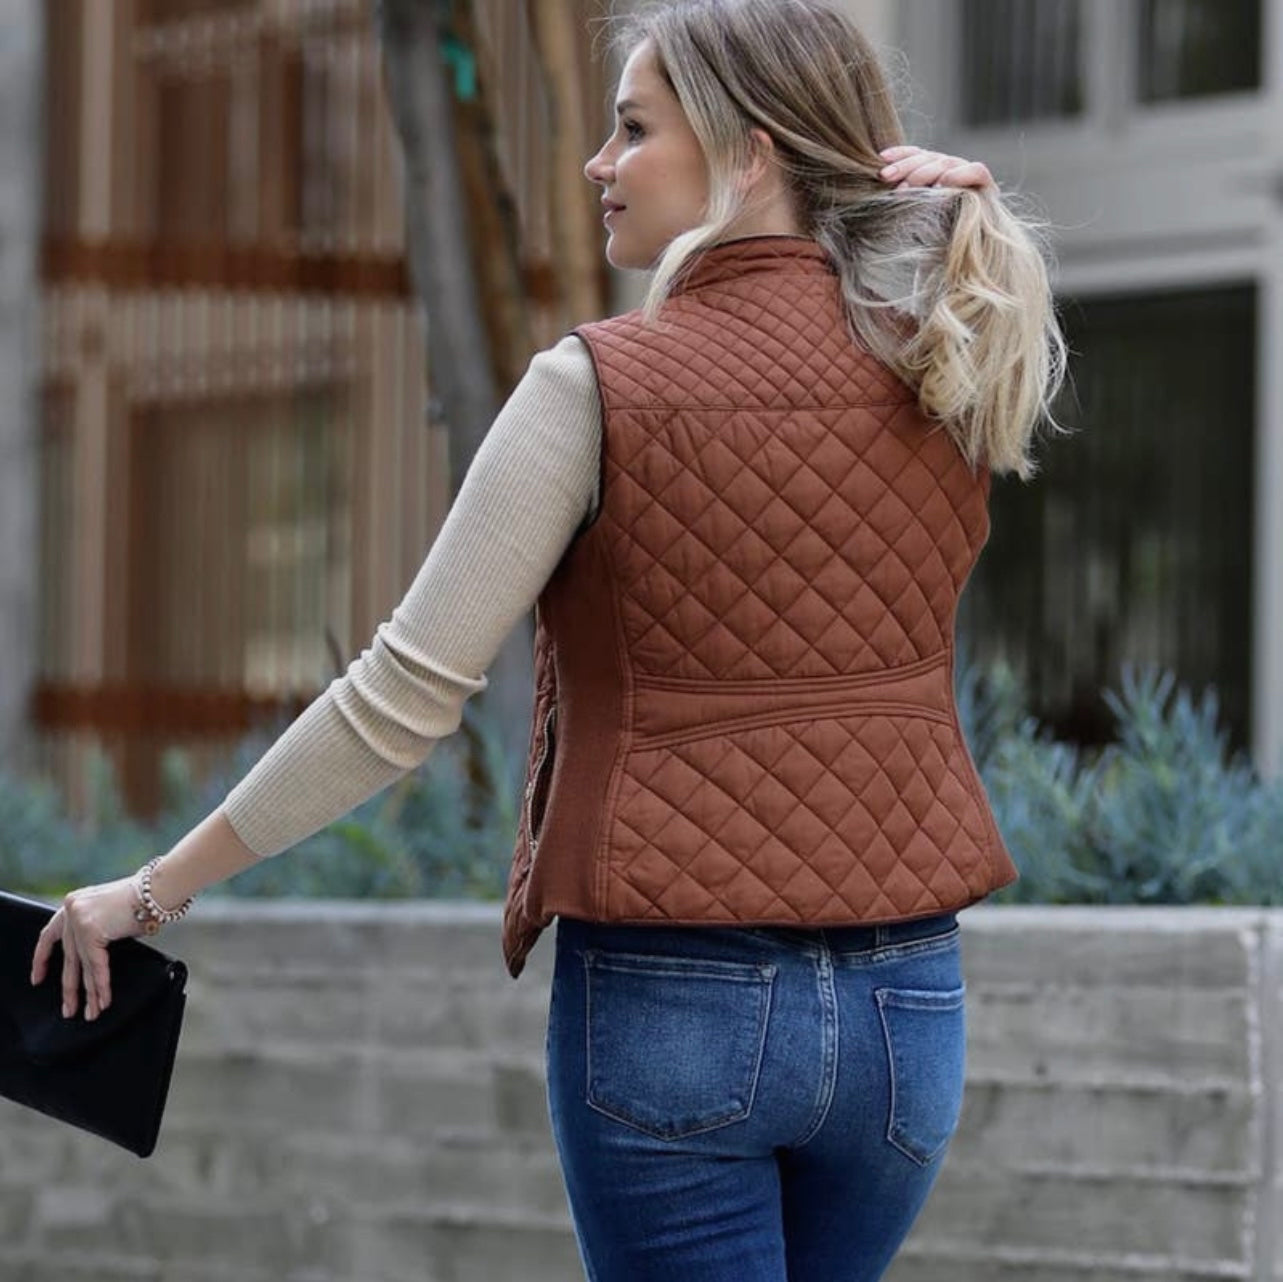 Ready for Fall - Quilted Vest